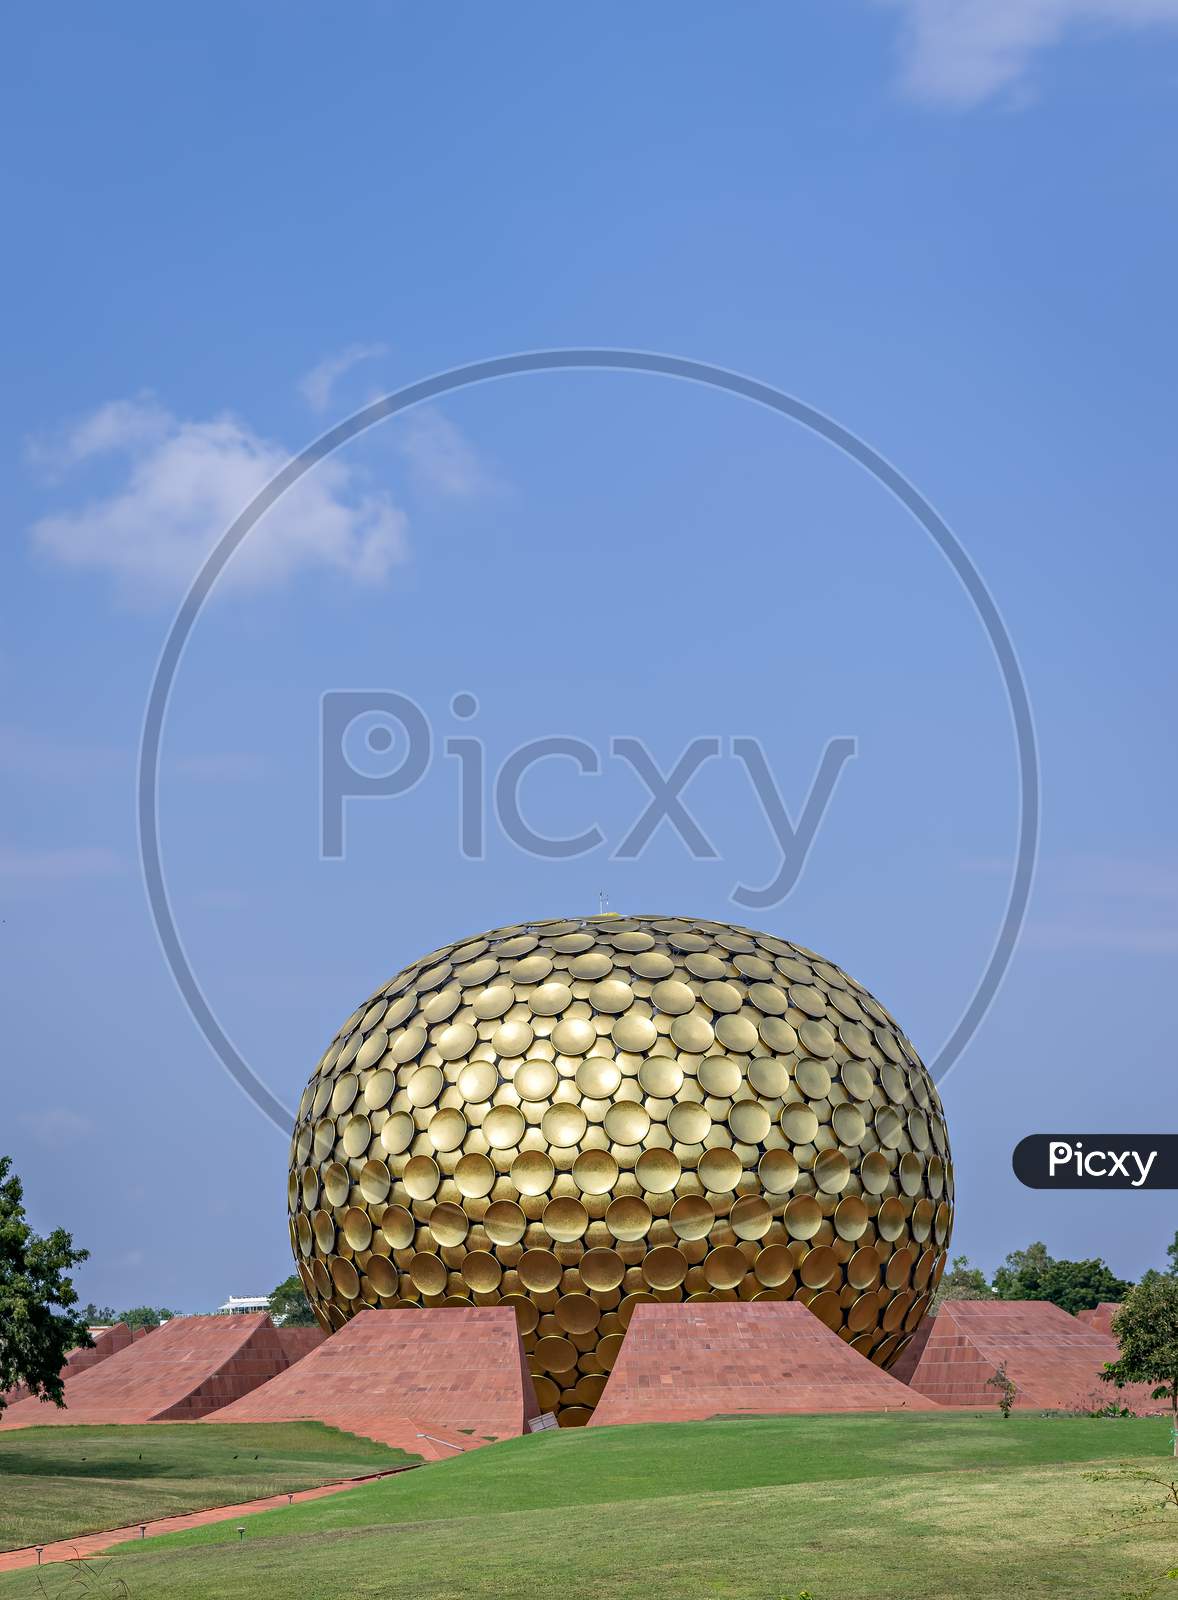 Golden Dome Of Matrimandir, An Edifice Of Spiritual Significance For Practitioners Of Integral Yoga.